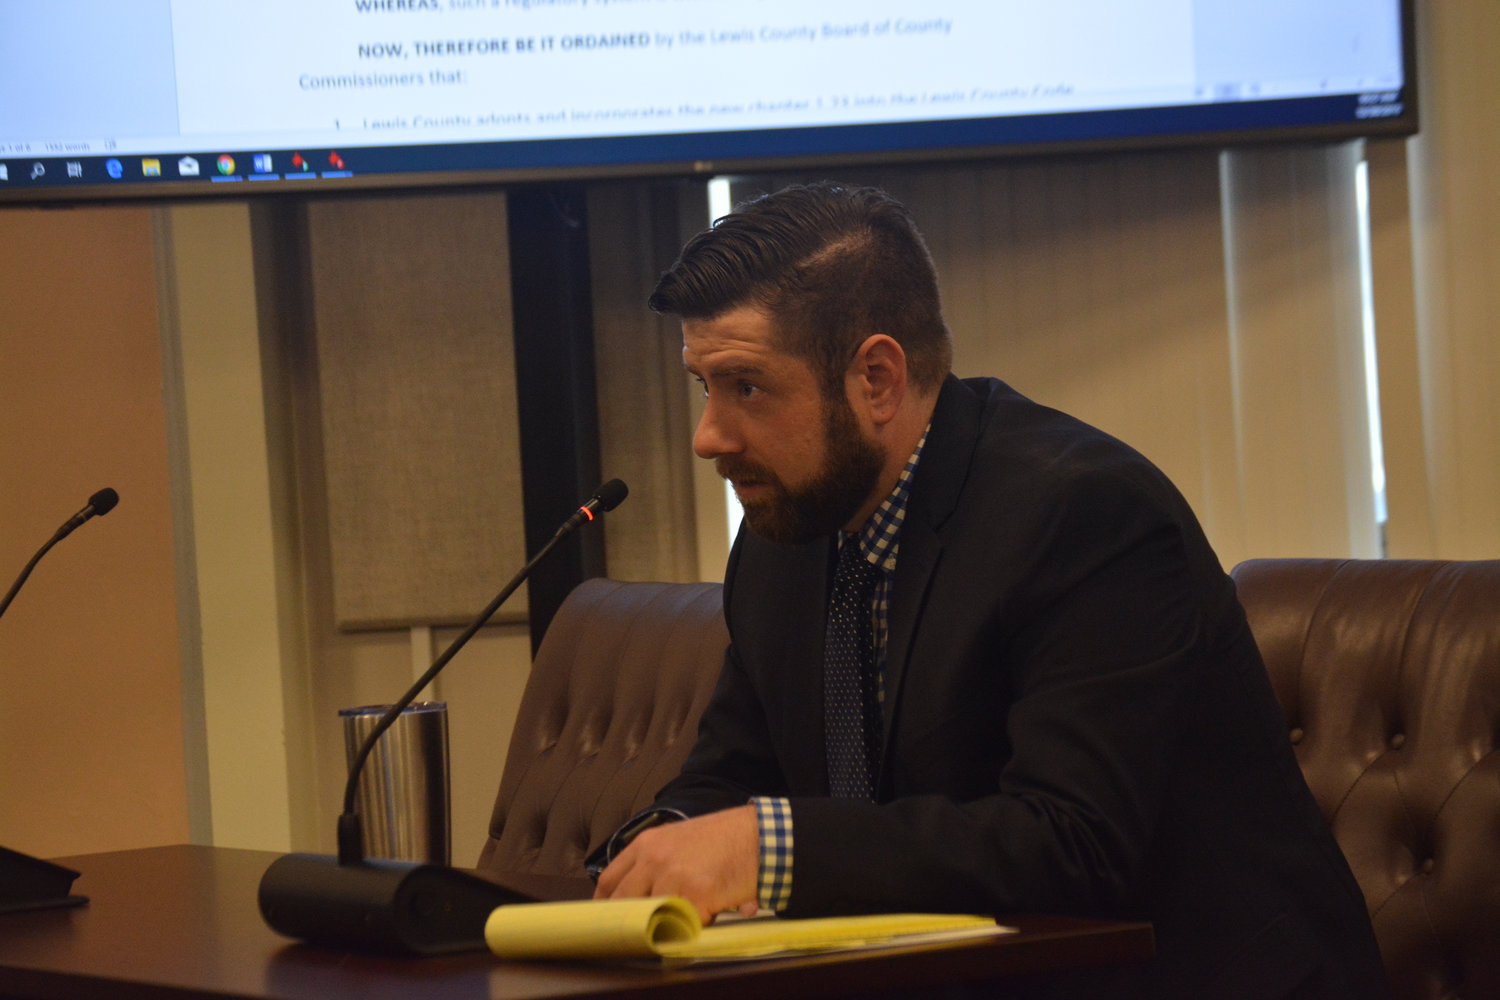 Senior Civil Deputy Prosecuting Attorney Cullen Gatten presented a new noise ordinance before the Board of County Commissioners.